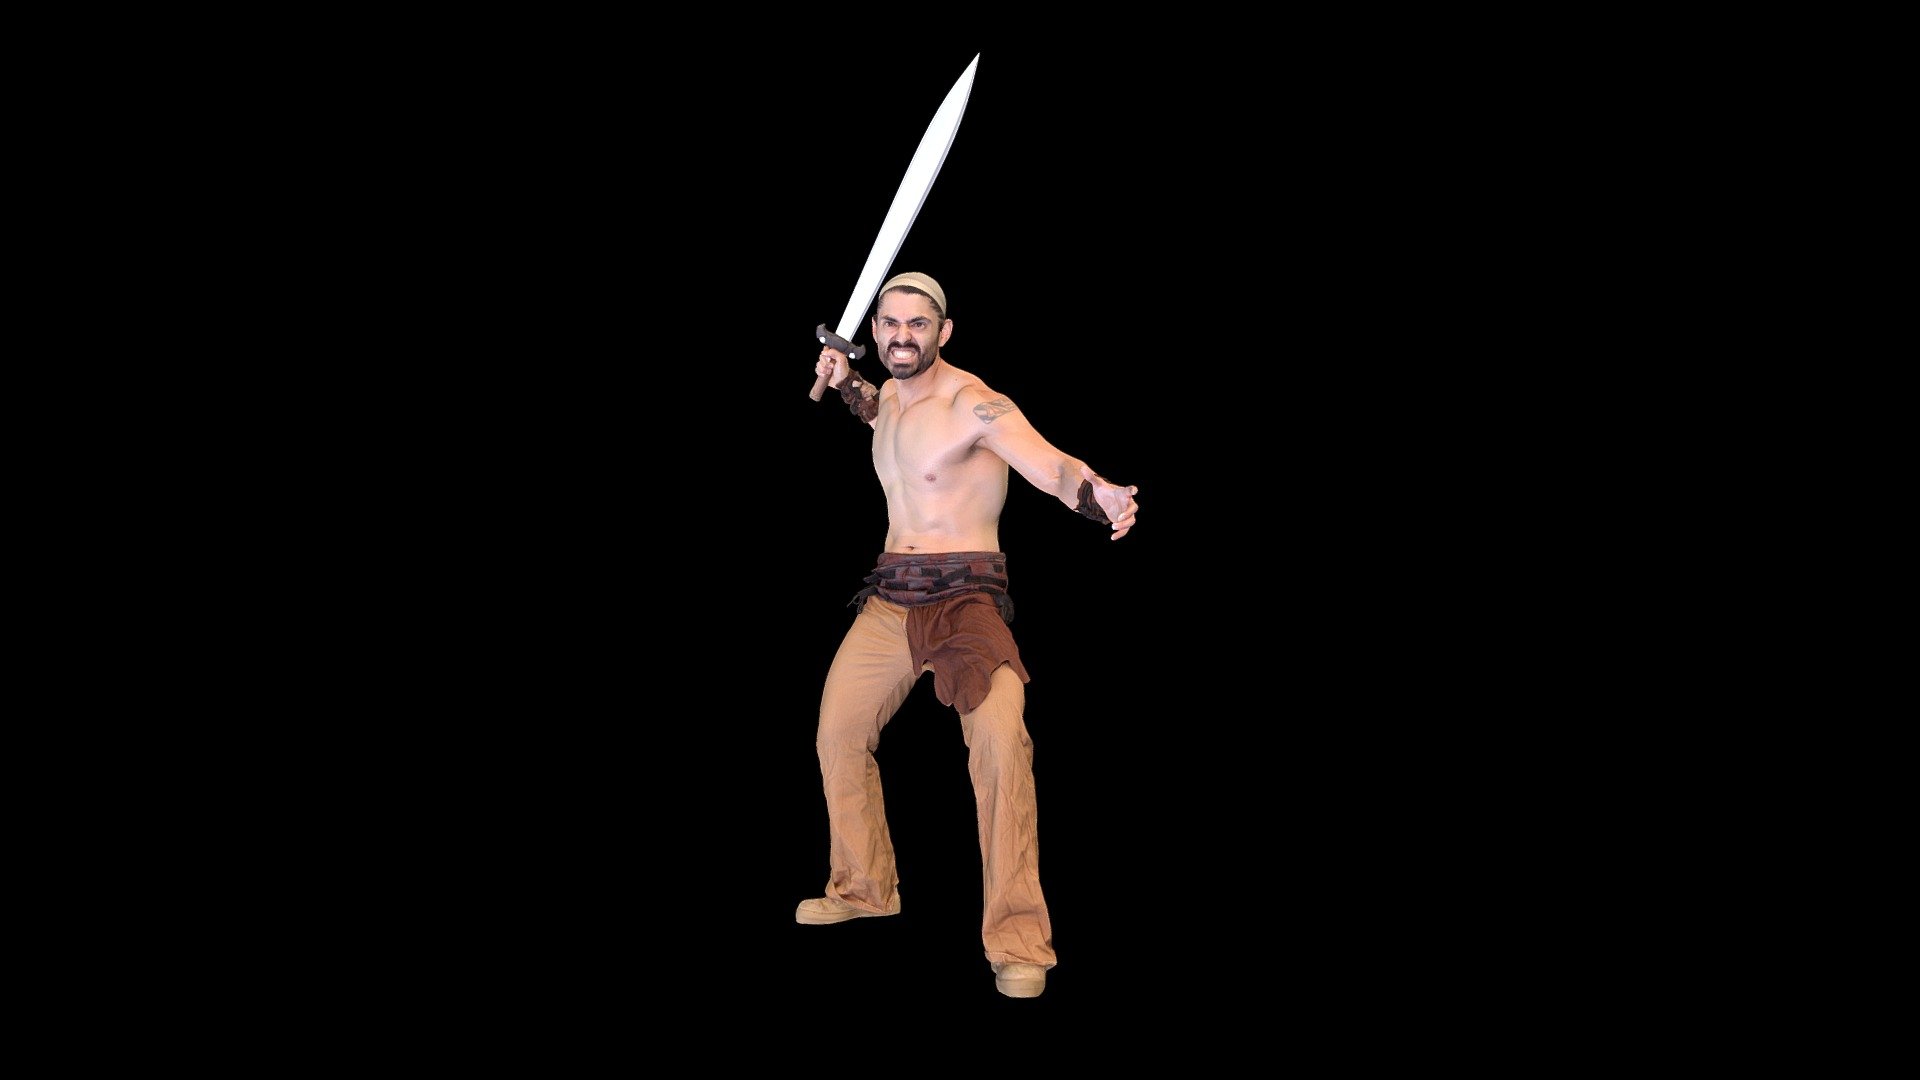 Victor holding a sword showing his muscles.

Product Features:




Game Engine and PBR ready

High Poly

Textures:

All maps are in PNG format.




Diffuse Map (8192x8192)

Specular Map (8192x8192)

Roughness Map (8192x8192)

Normal Map (8192x8192)

SSS Map (8192x8192)

Model Polycounts:




156704 Faces

78664 Vertices

Available File Formats:




OBJ

FBX

About Human Engine:

Using our 150 DSLR Photogrammetry rig, we create 3D and 4D assets for Games, VFX, Movies, Television, Virtual Reality and Augmented Reality. From 3D scanning to rigging, game-engine integration, we have your character creation needs covered 3d model